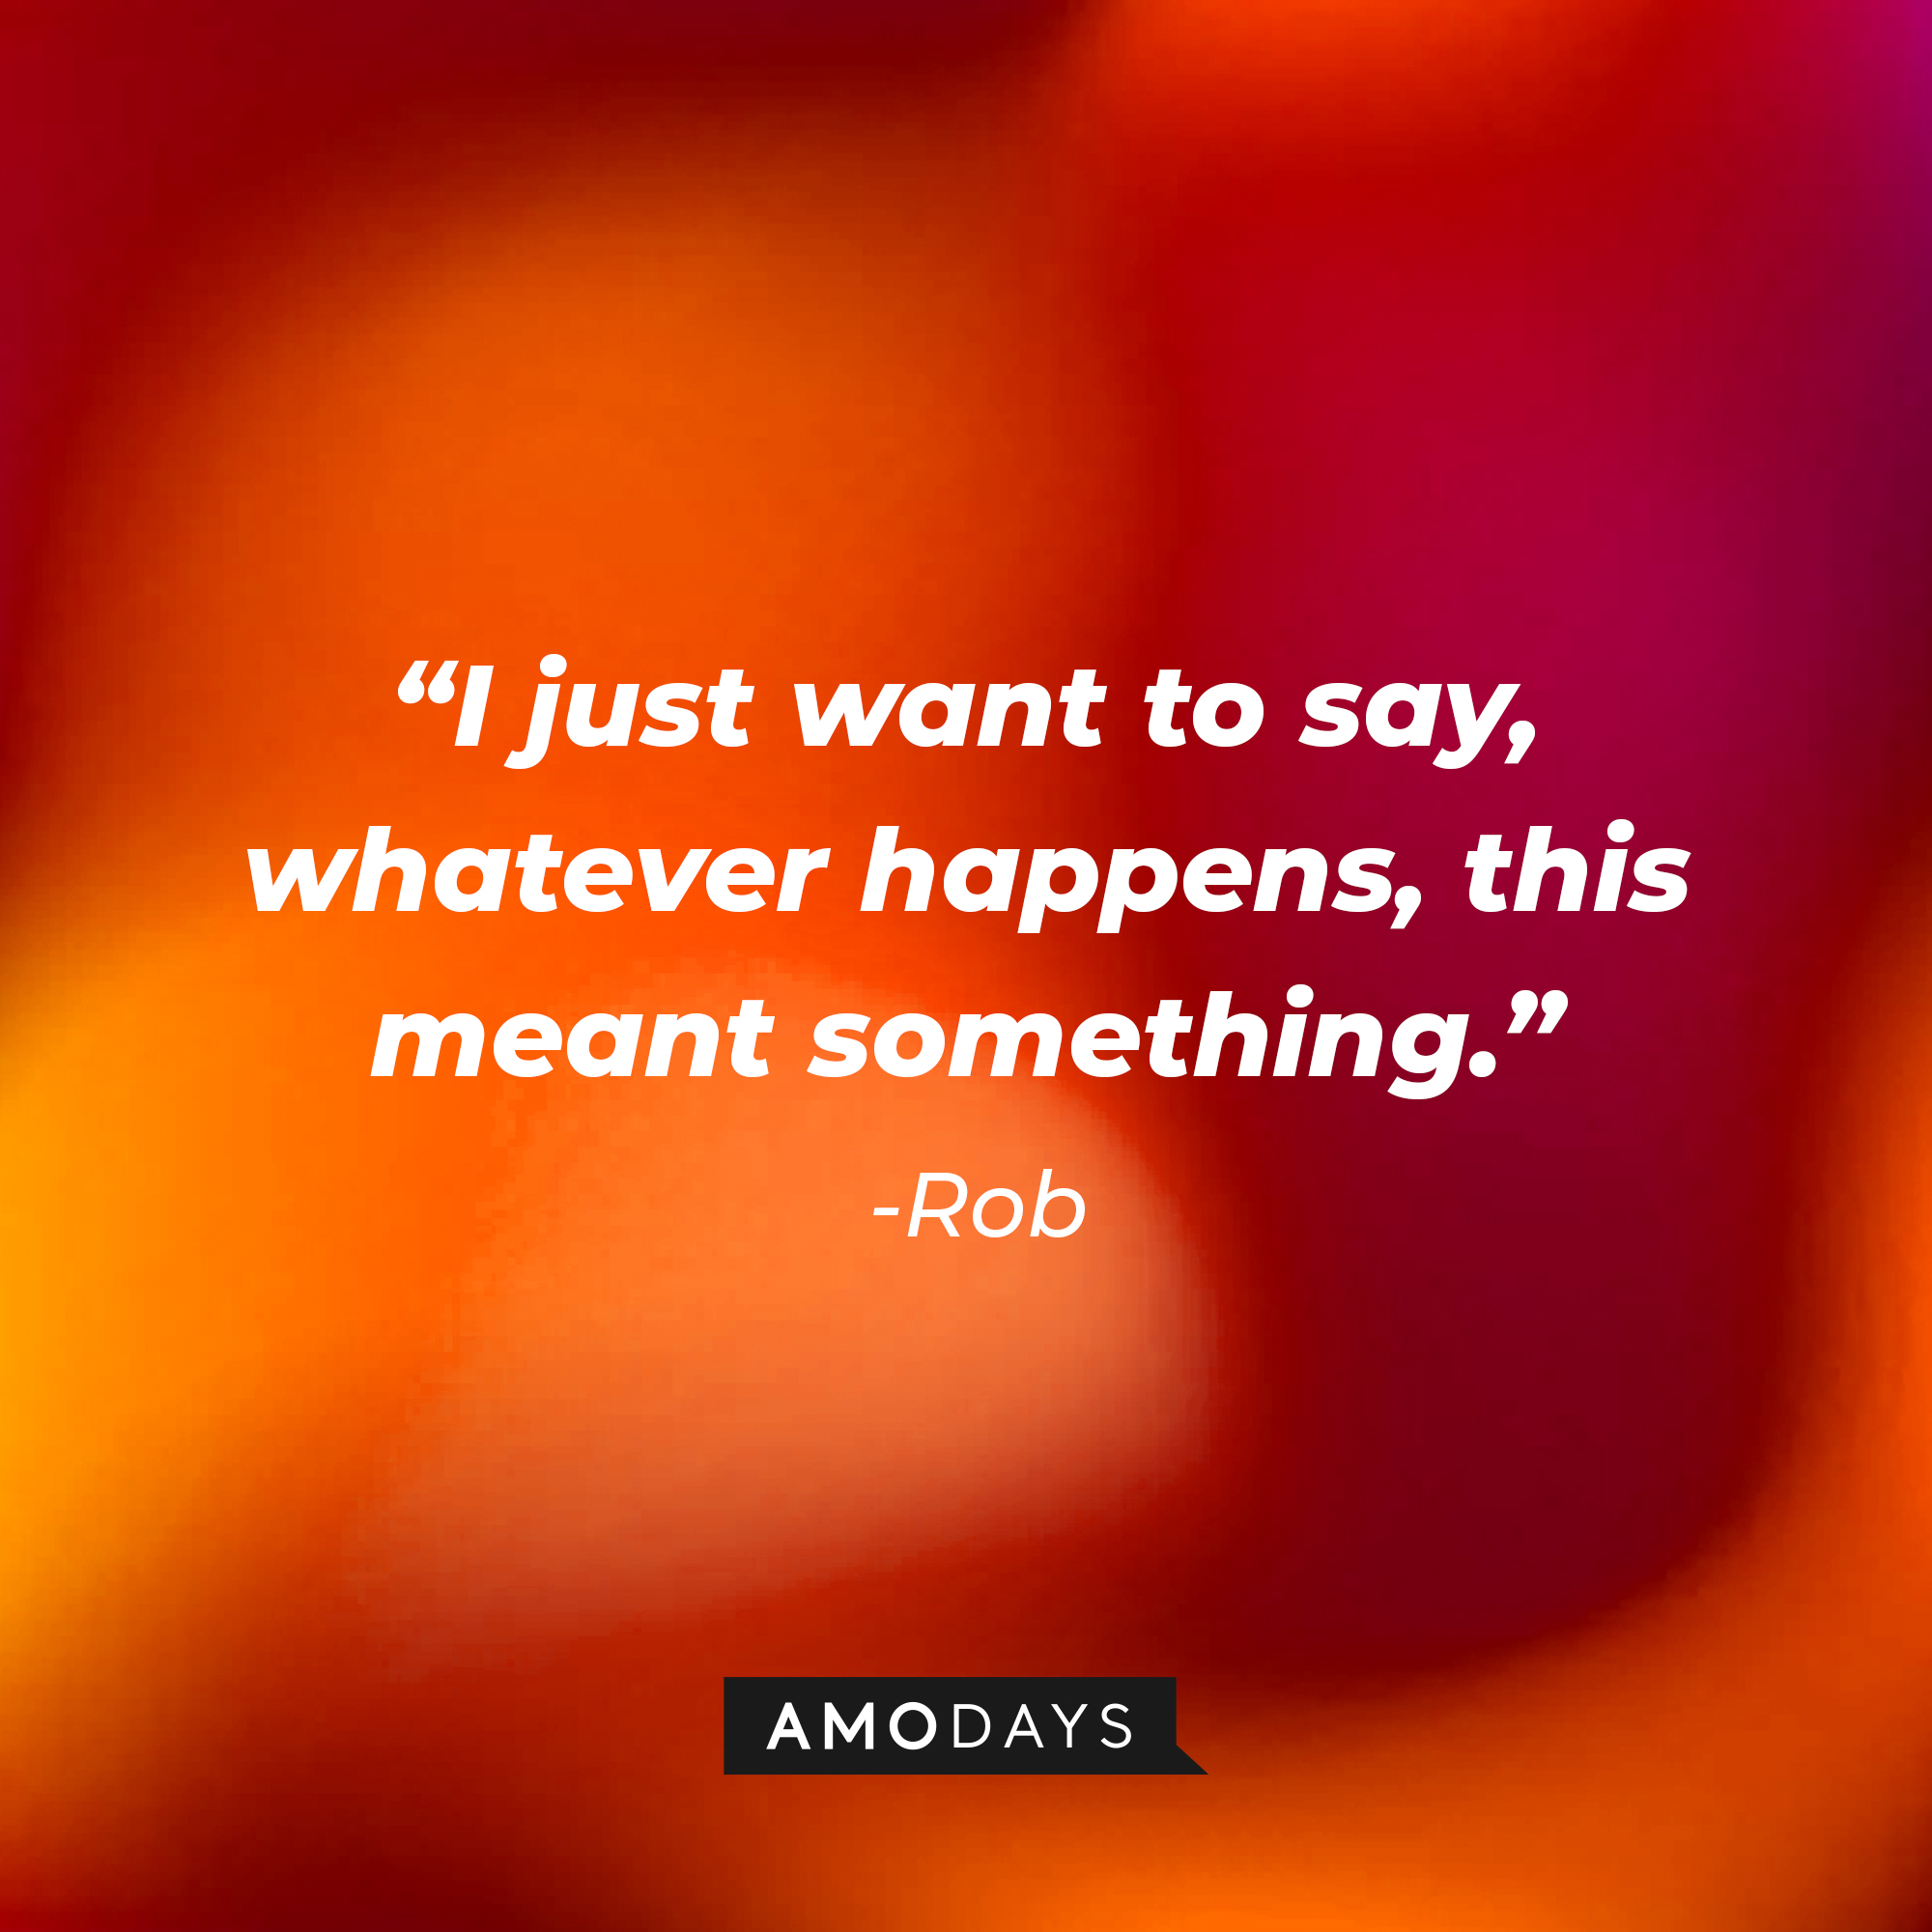 Rob’s quote from “Modern Love”: “I just want to say, whatever happens, this meant something.” | Source: AmoDays